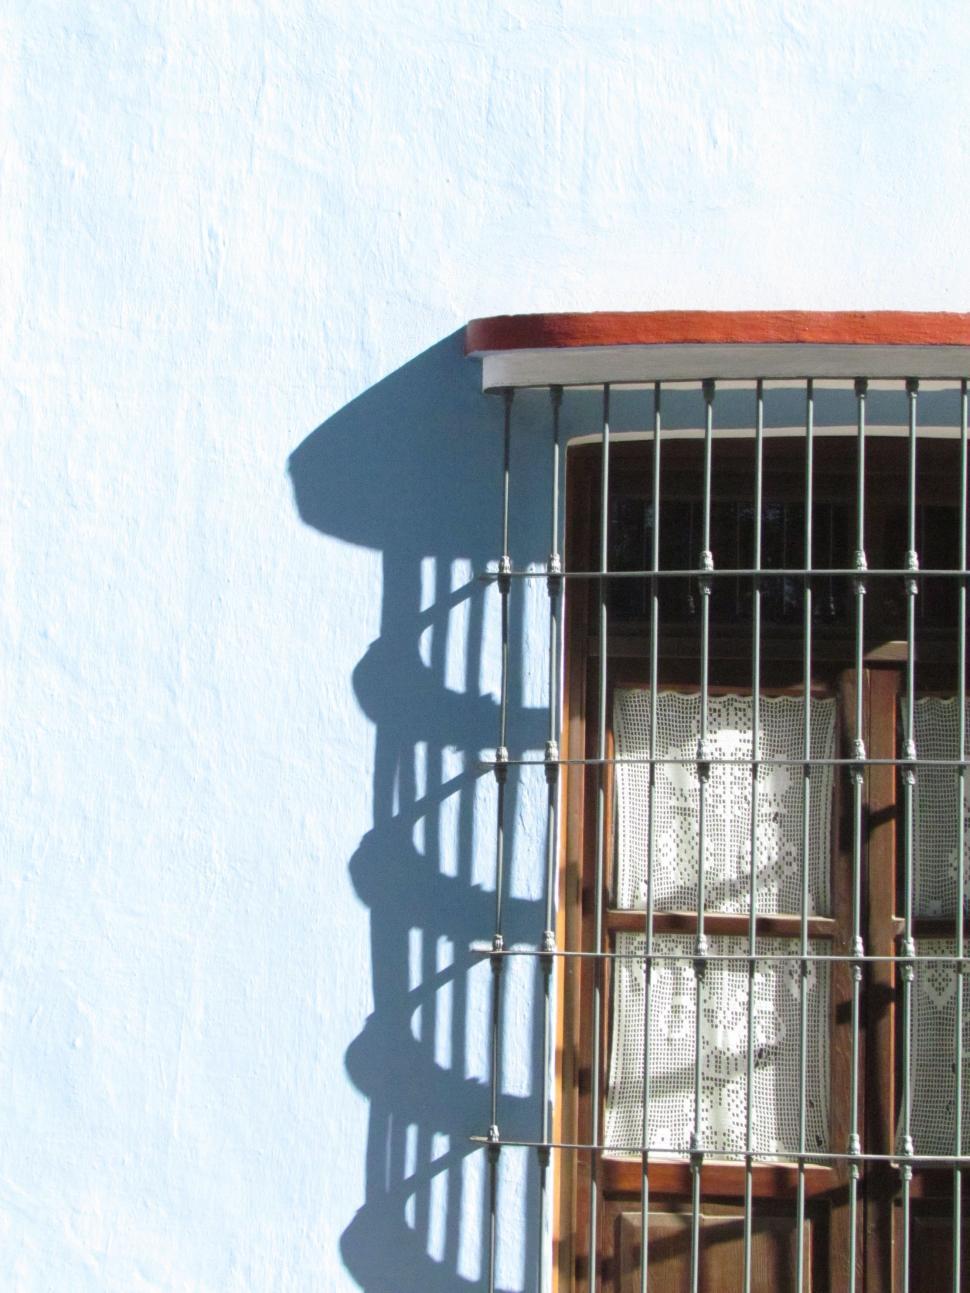 Free Image of Window With Bars on the Outside 